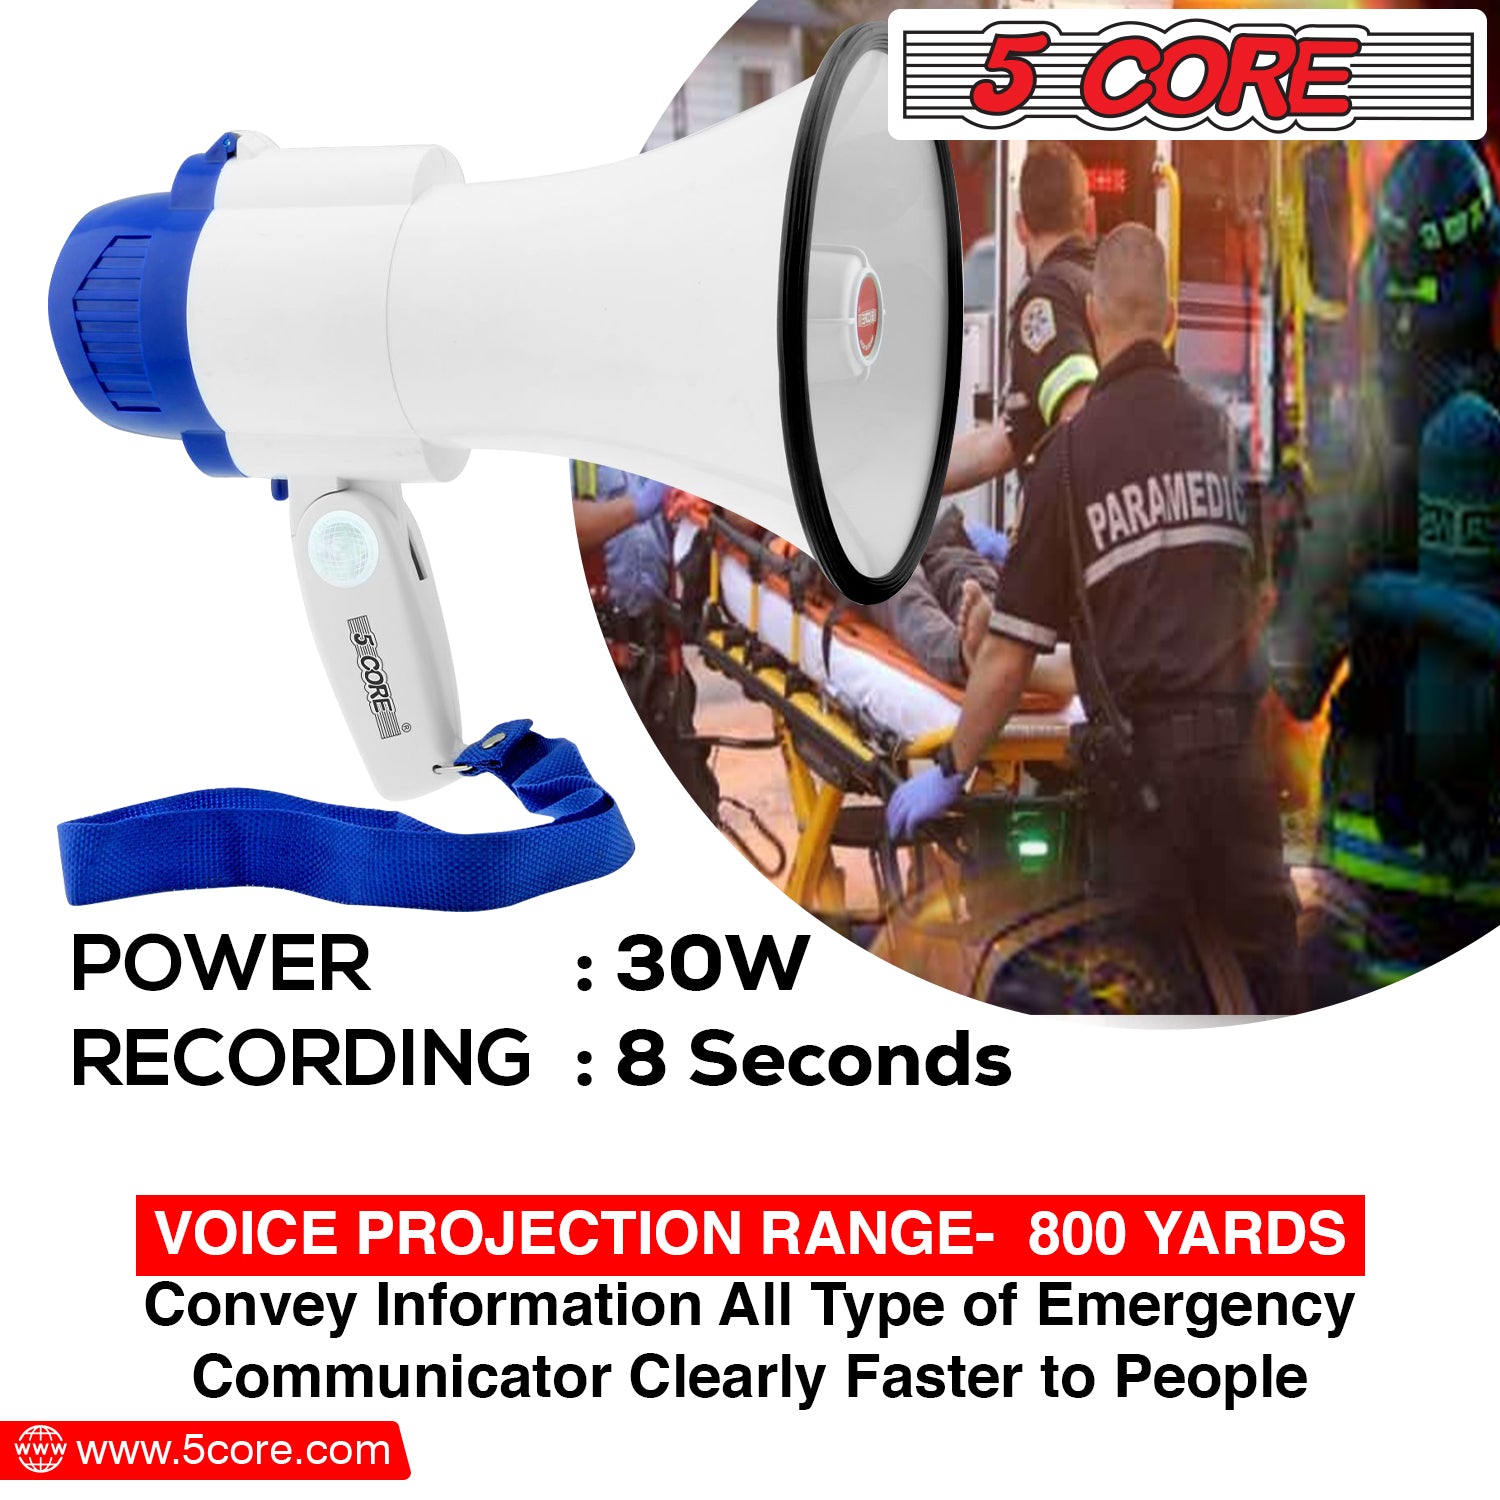 30W Power amplifies your voice with clarity up to 800 yards